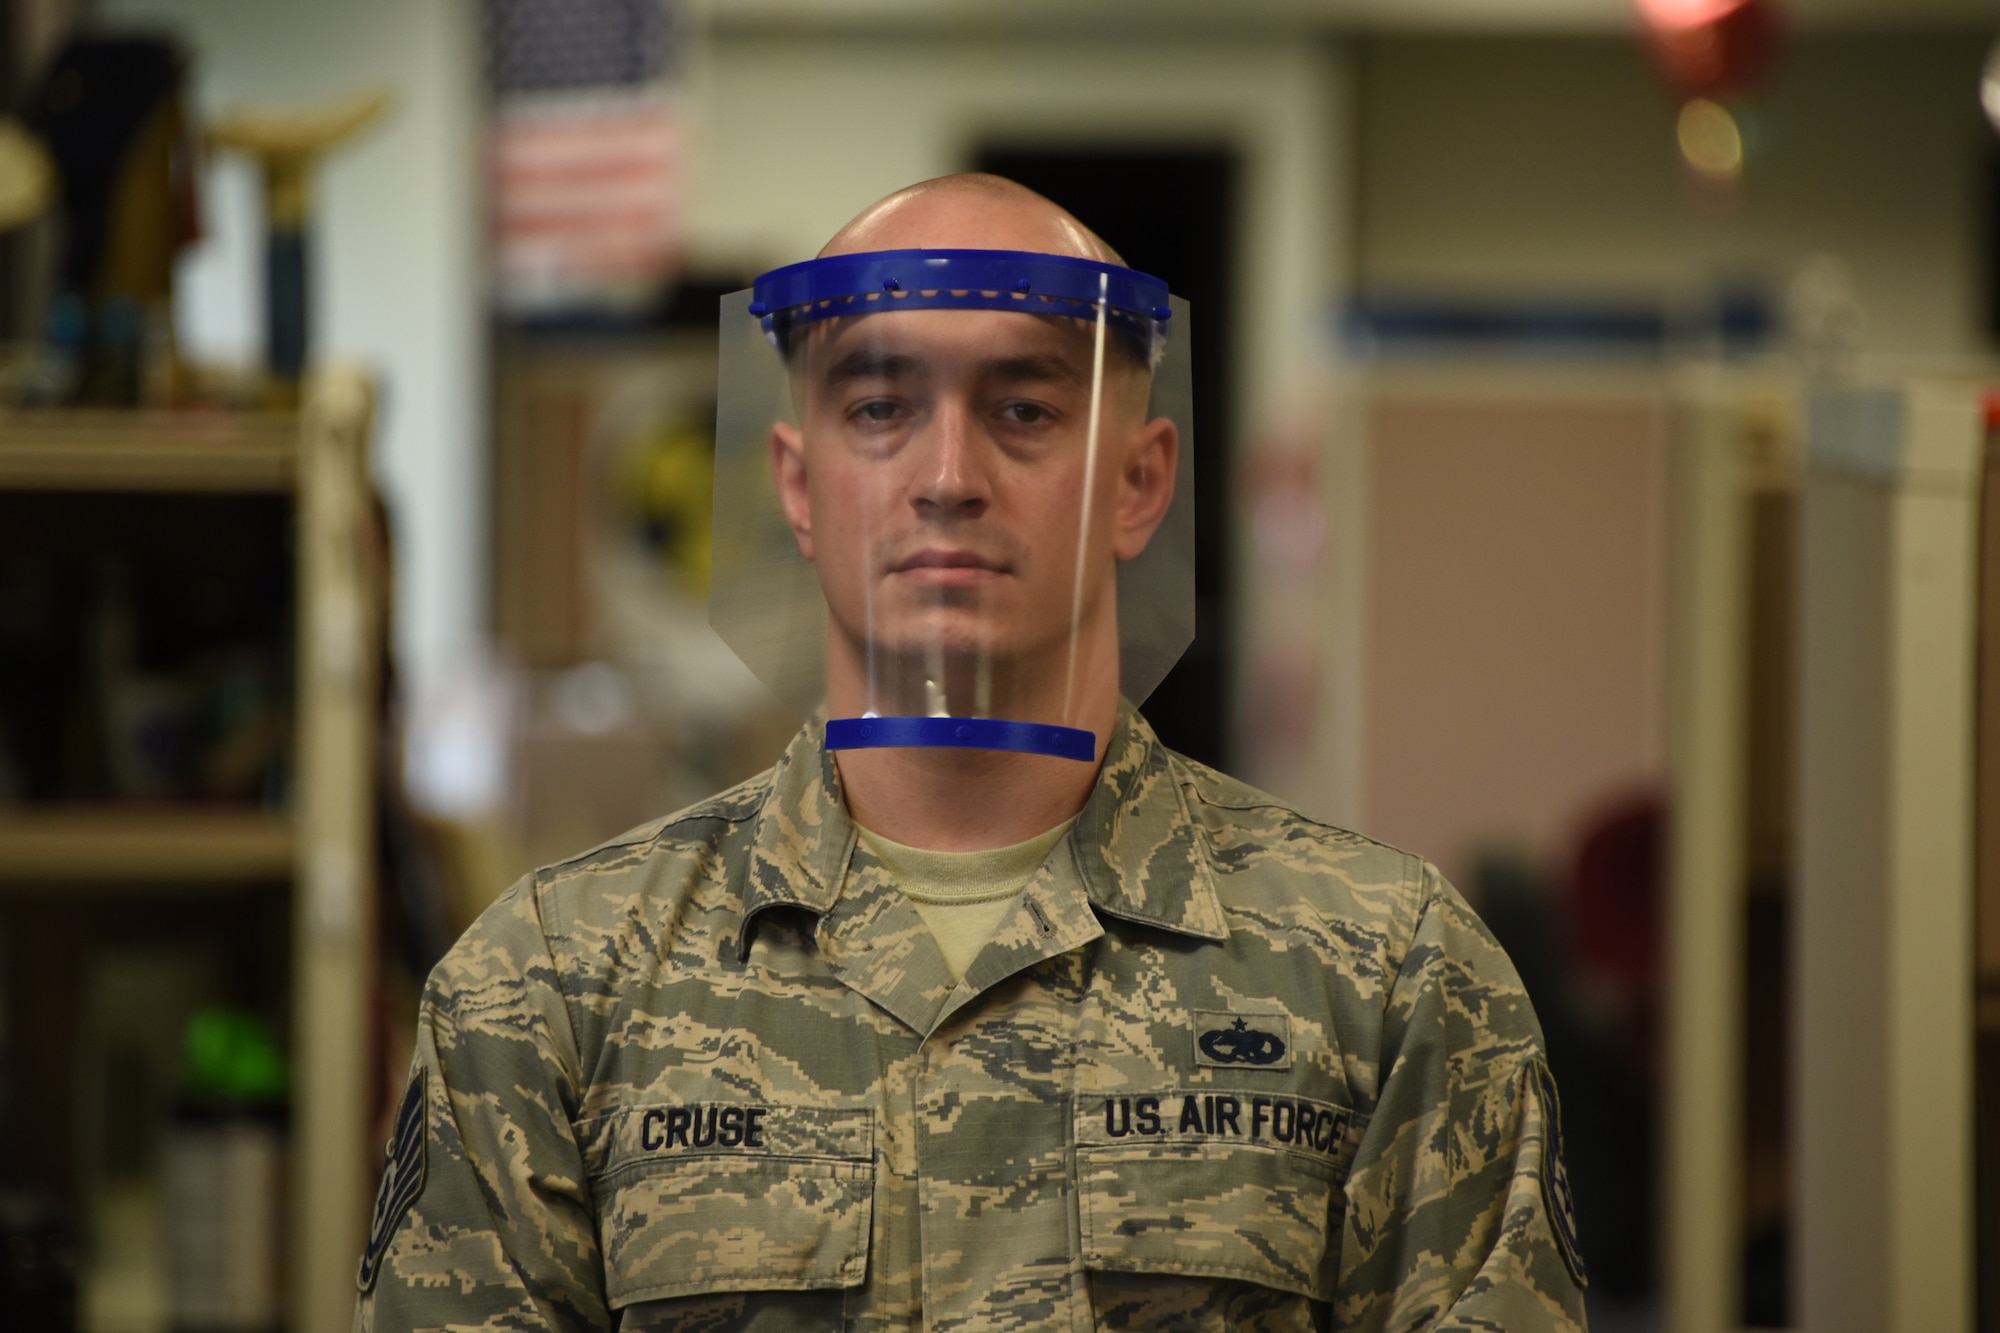 Tech. Sgt. Joel Cruse, 363rd Training Squadron AMMO instructor, demonstrates how the face shield he made from a 3D printer and a few other items is properly worn at Sheppard Air Force Base, Texas, April 7, 2020. Face shields are a clear physical barrier for liquid droplets. If someone who is symptomatic coughs near or in the direction of the face of someone where the shield, it prevents those droplets from reaching facial points of entry. (U.S. Air Force photo by Staff Sgt. Robert L. McIlrath)